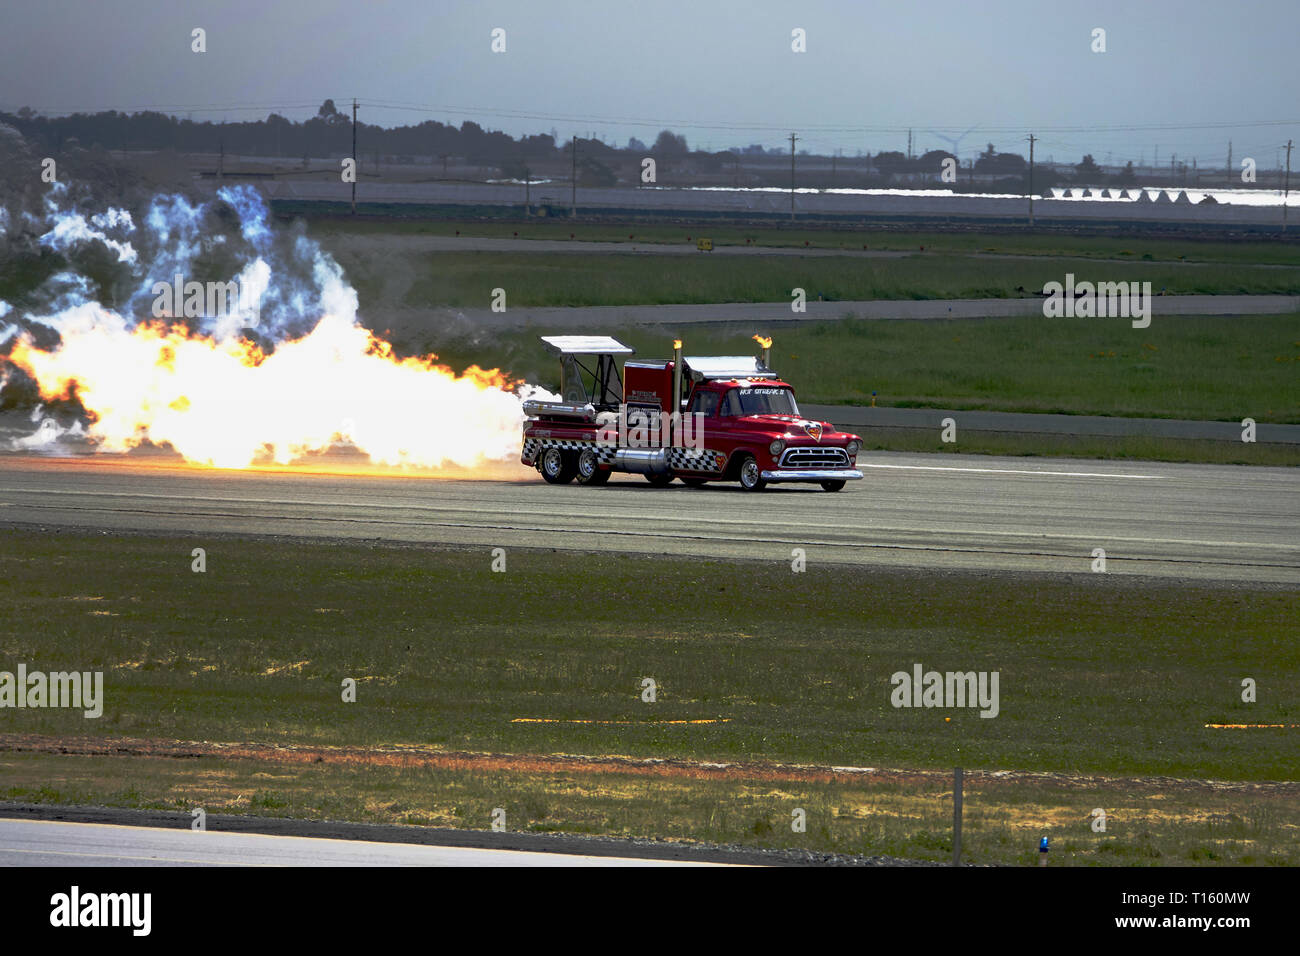 California, USA. 23rd Mar, 2019. 23rd March, 2019   Salinas, California, USA      Scenes from the annual  Salinas Air-Show, featuring the US Navy 'Blue Angels' arobatic team - here the 'Smoke and Thunder' Jet truck burns oil, and gas to an alarming degree. Credit: Motofoto/Alamy Live News Stock Photo